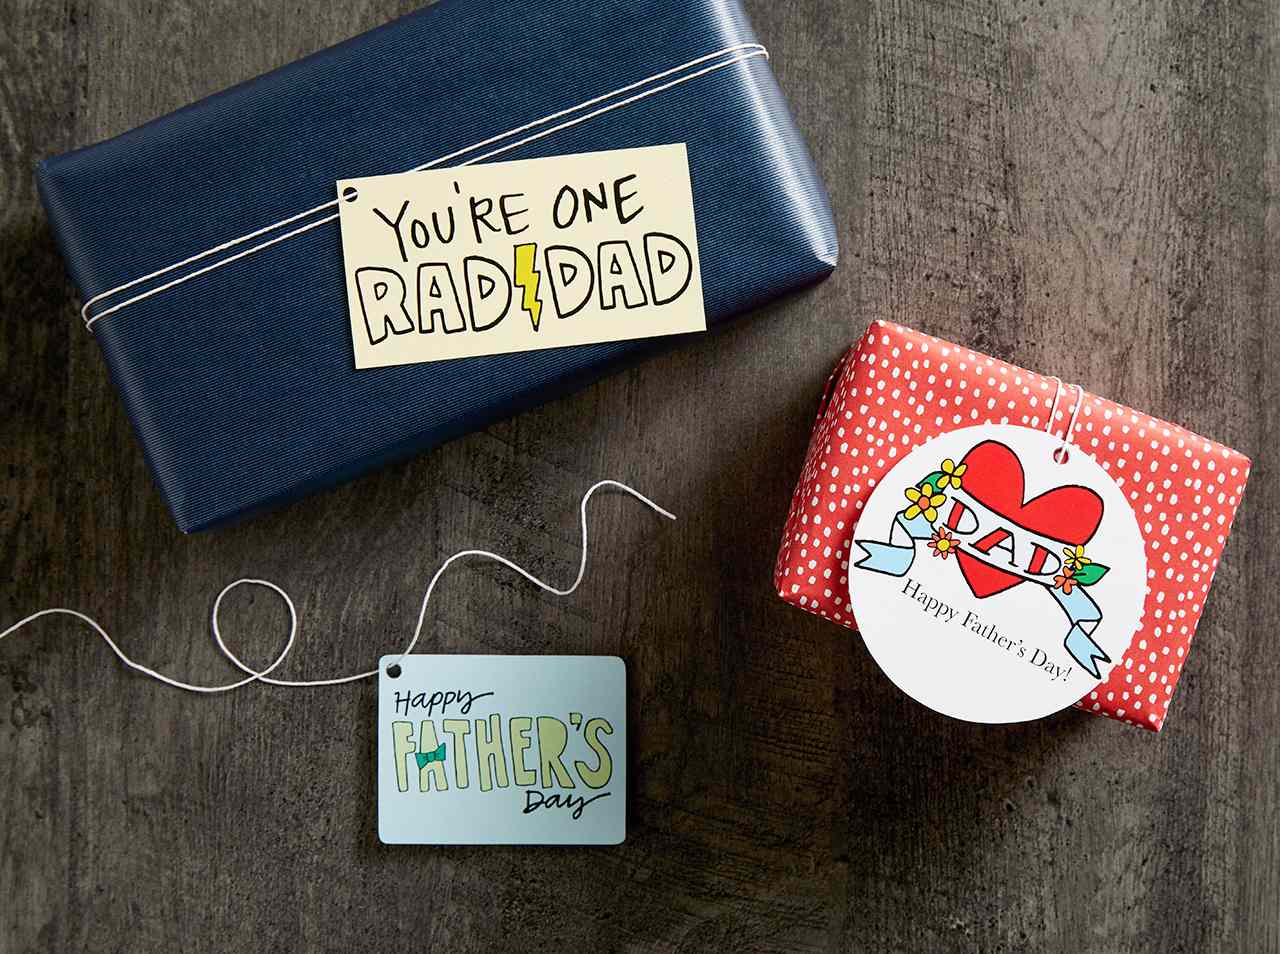 Super Dad Fathers Day Birthday Gift Set of 4 Coasters 